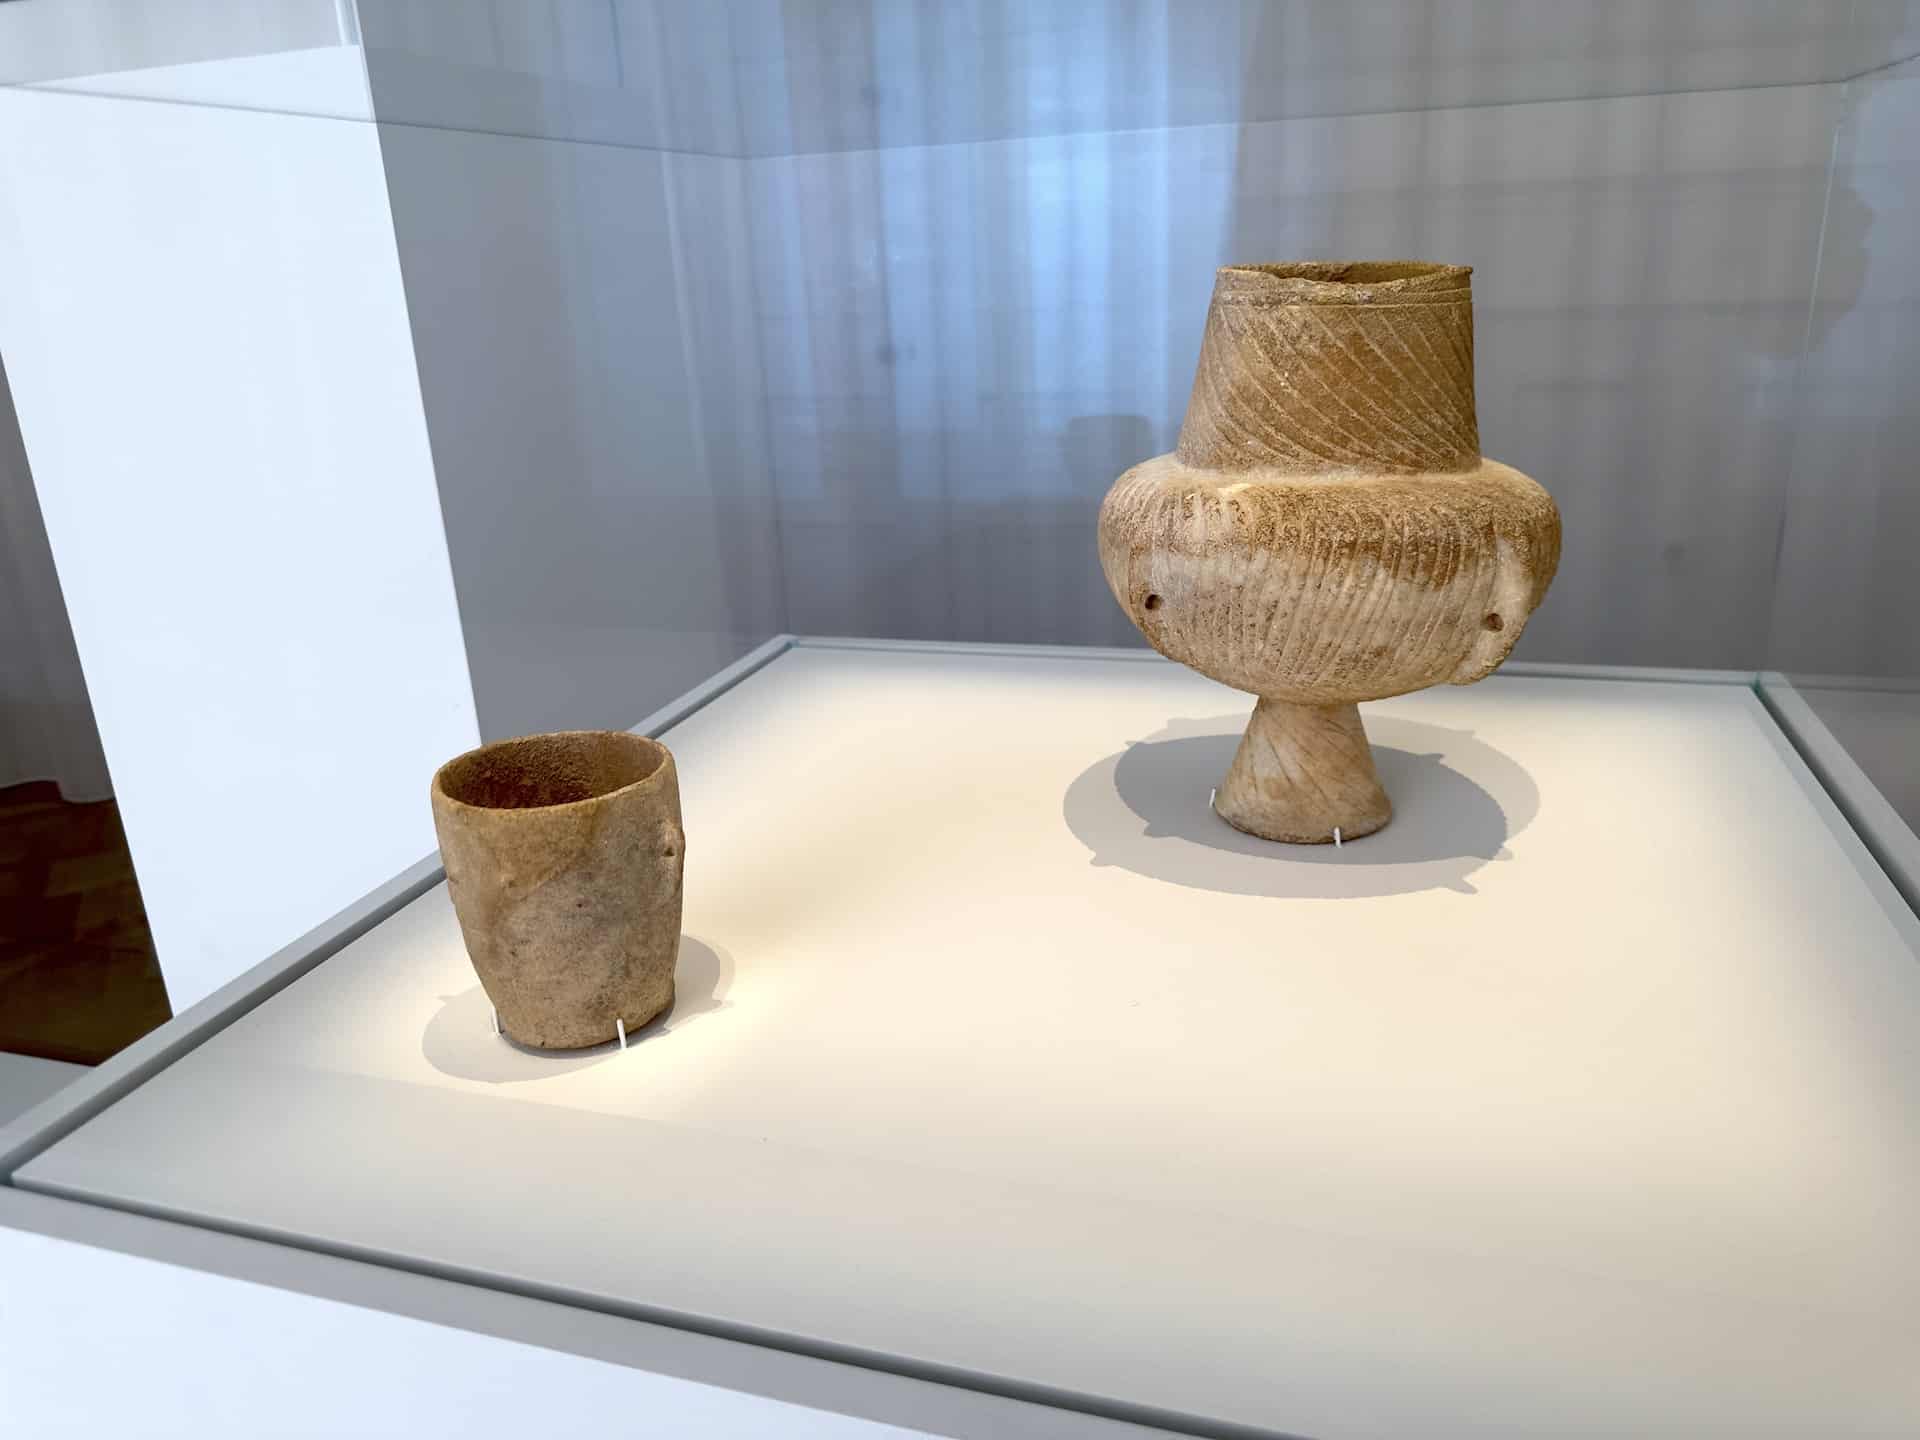 Vases in Homecoming in the Stathatos Mansion at the Museum of Cycladic Art in Athens, Greece